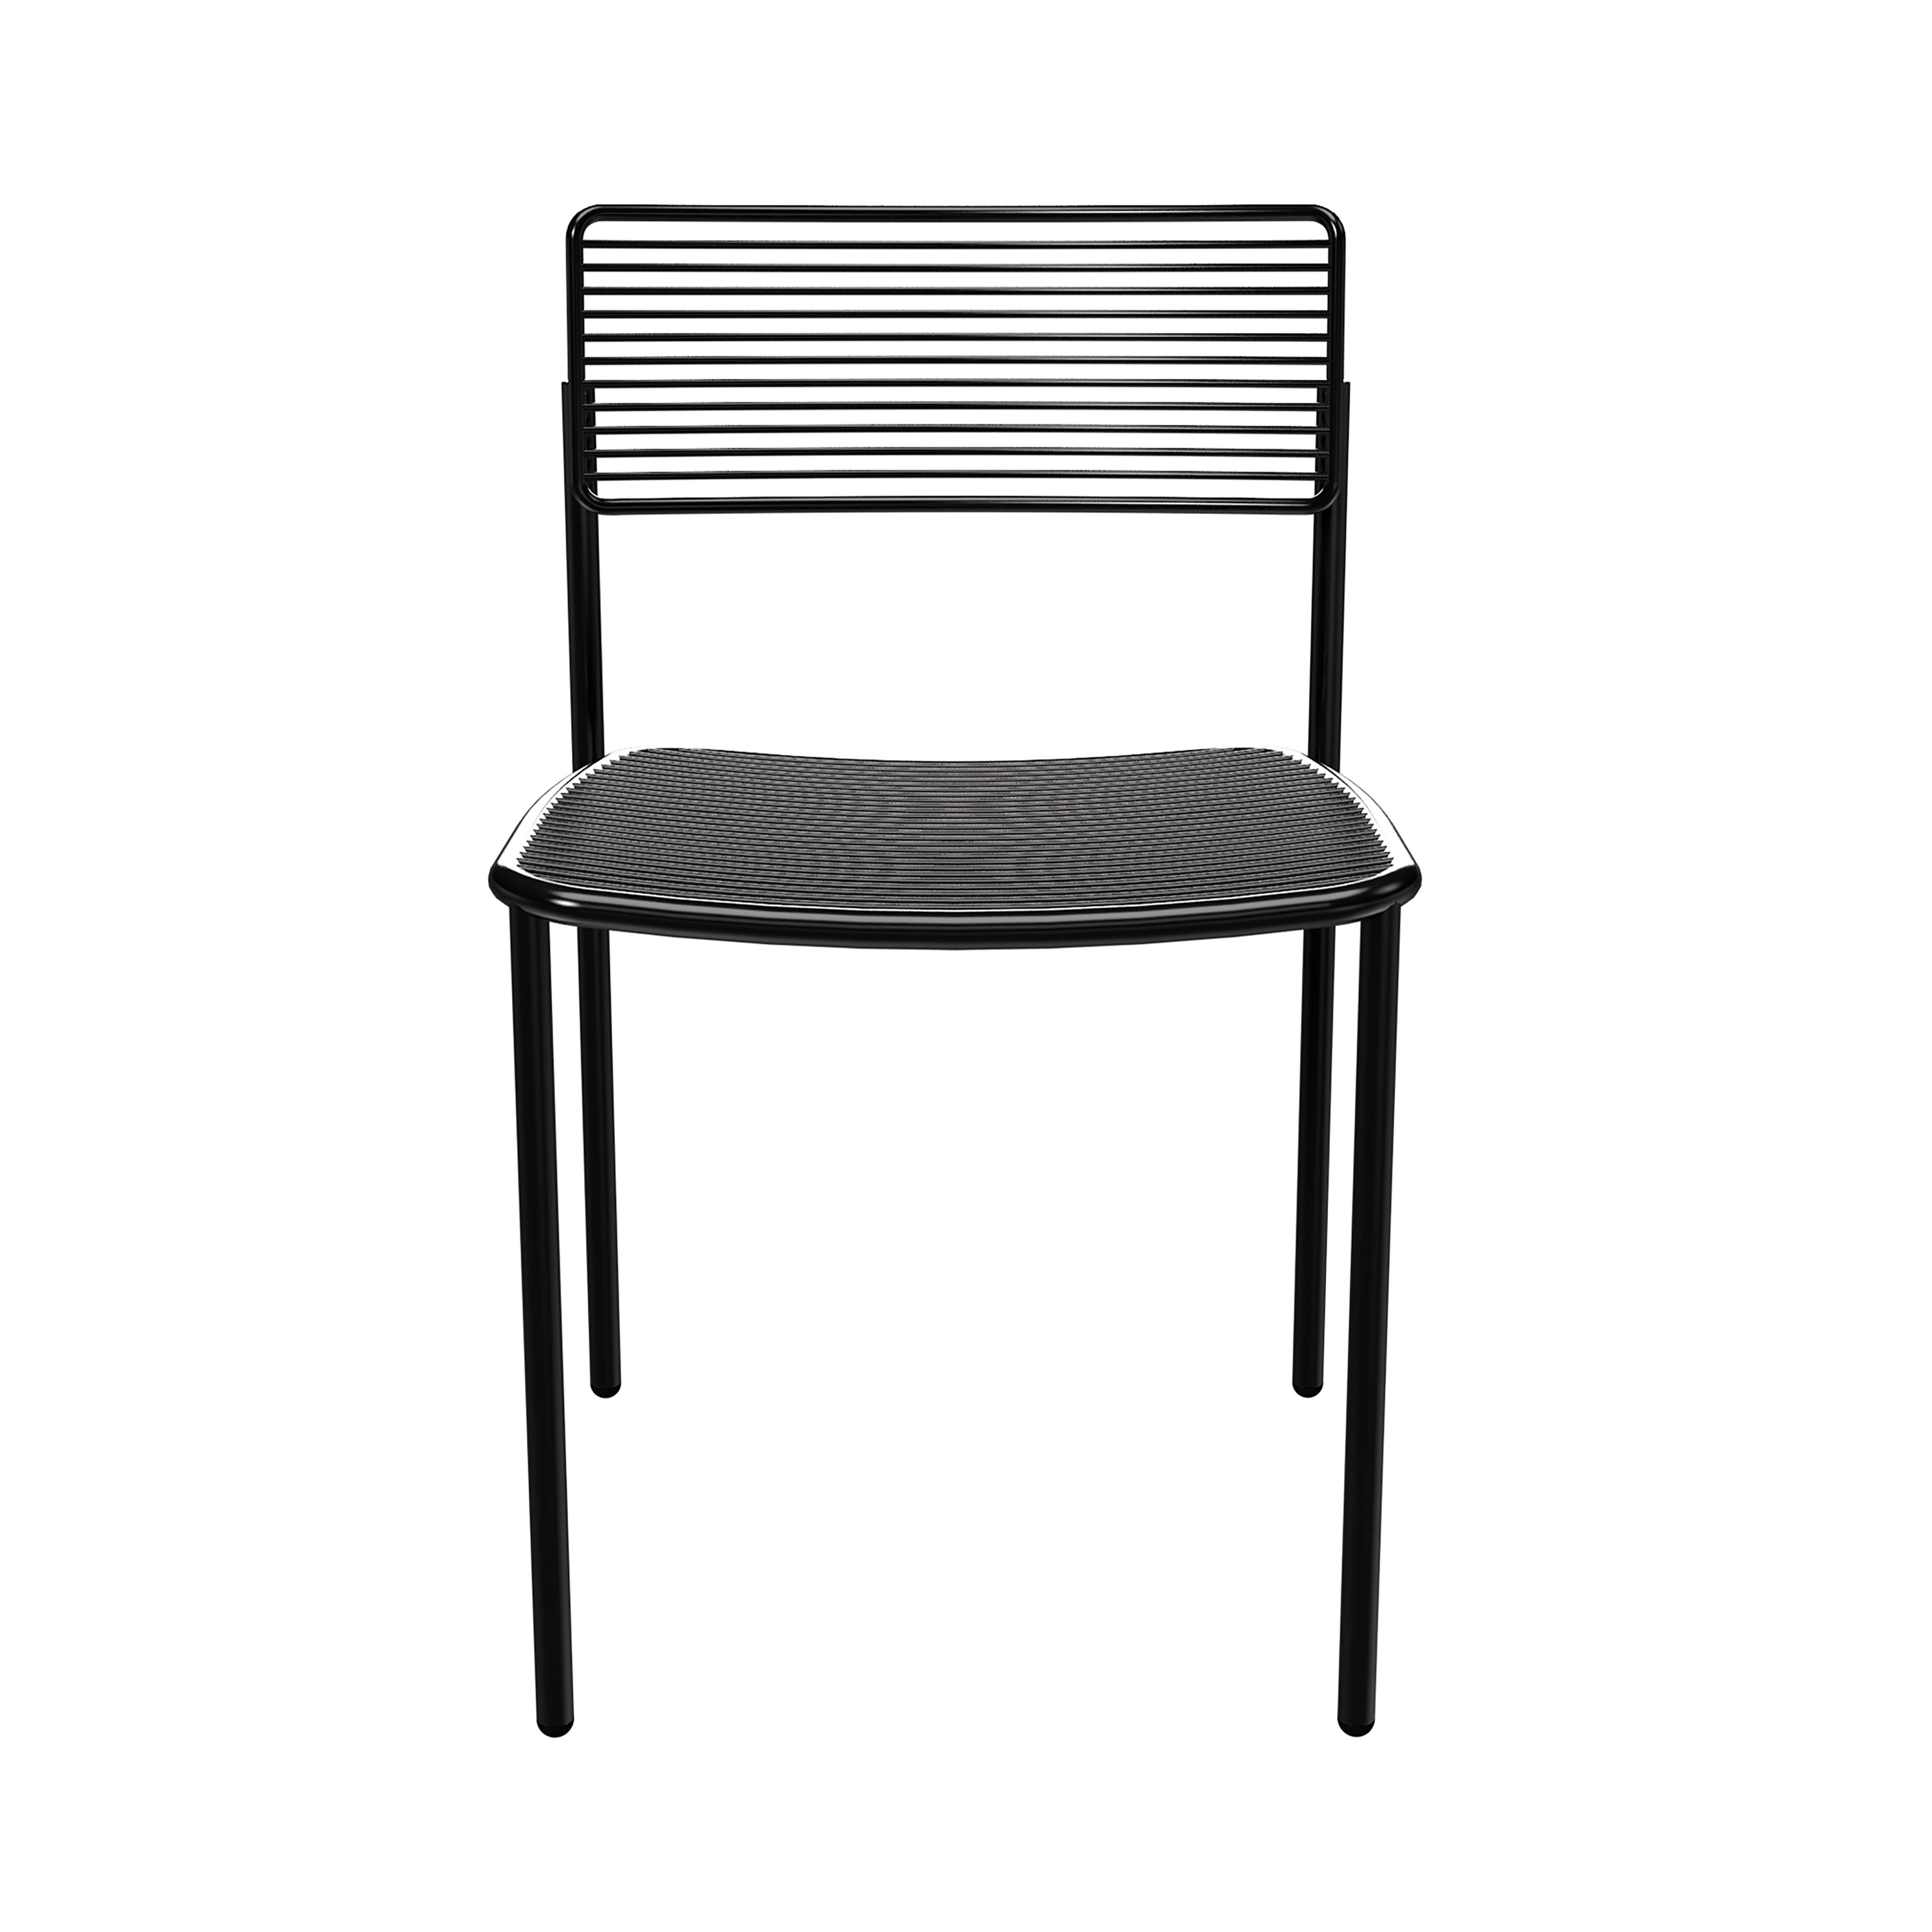 The Rachel Chair: Black + Without Seatpad